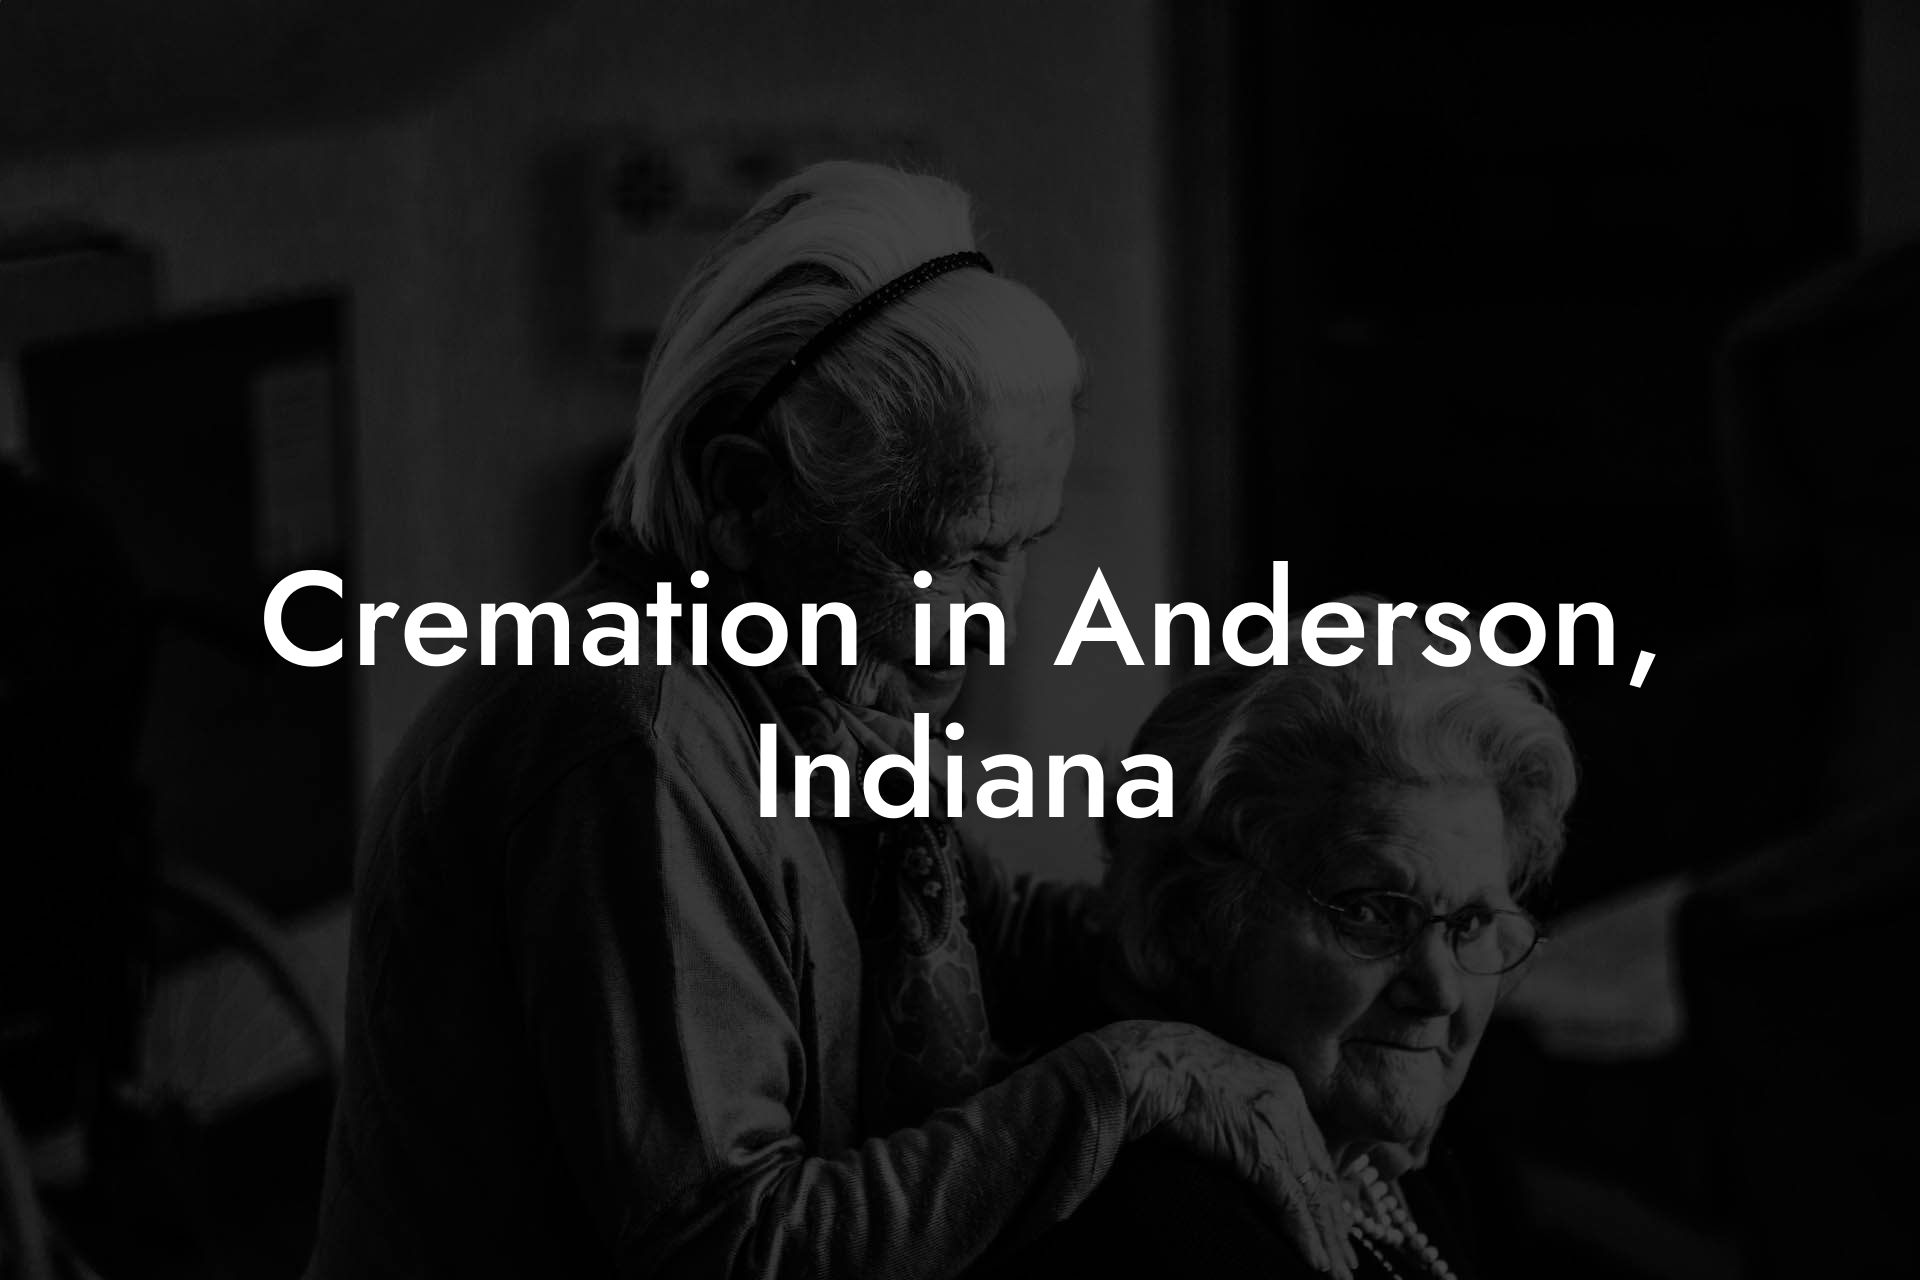 Cremation in Anderson, Indiana